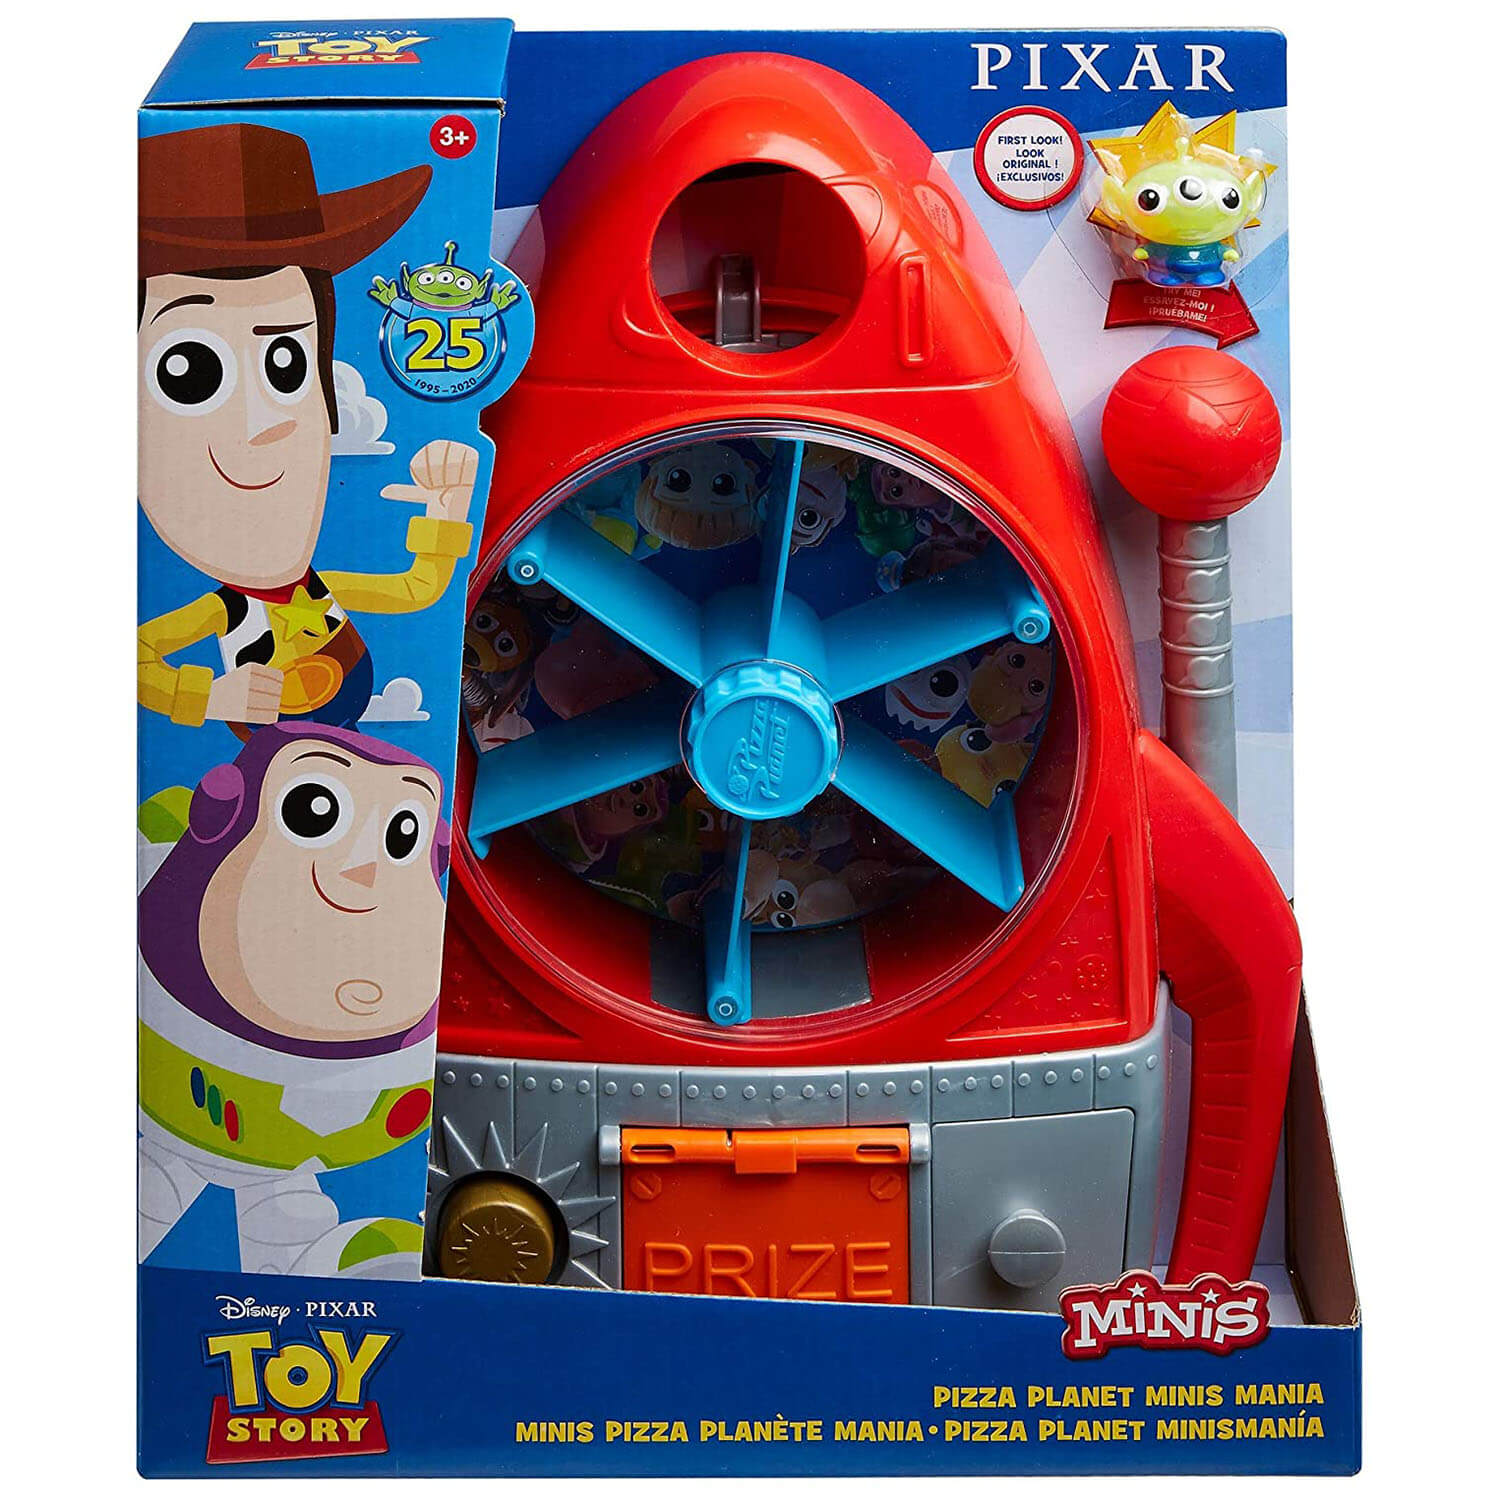 Front view of the Toy Story 25th Anniversary Pizza Planet Minis Mania Play Set package.